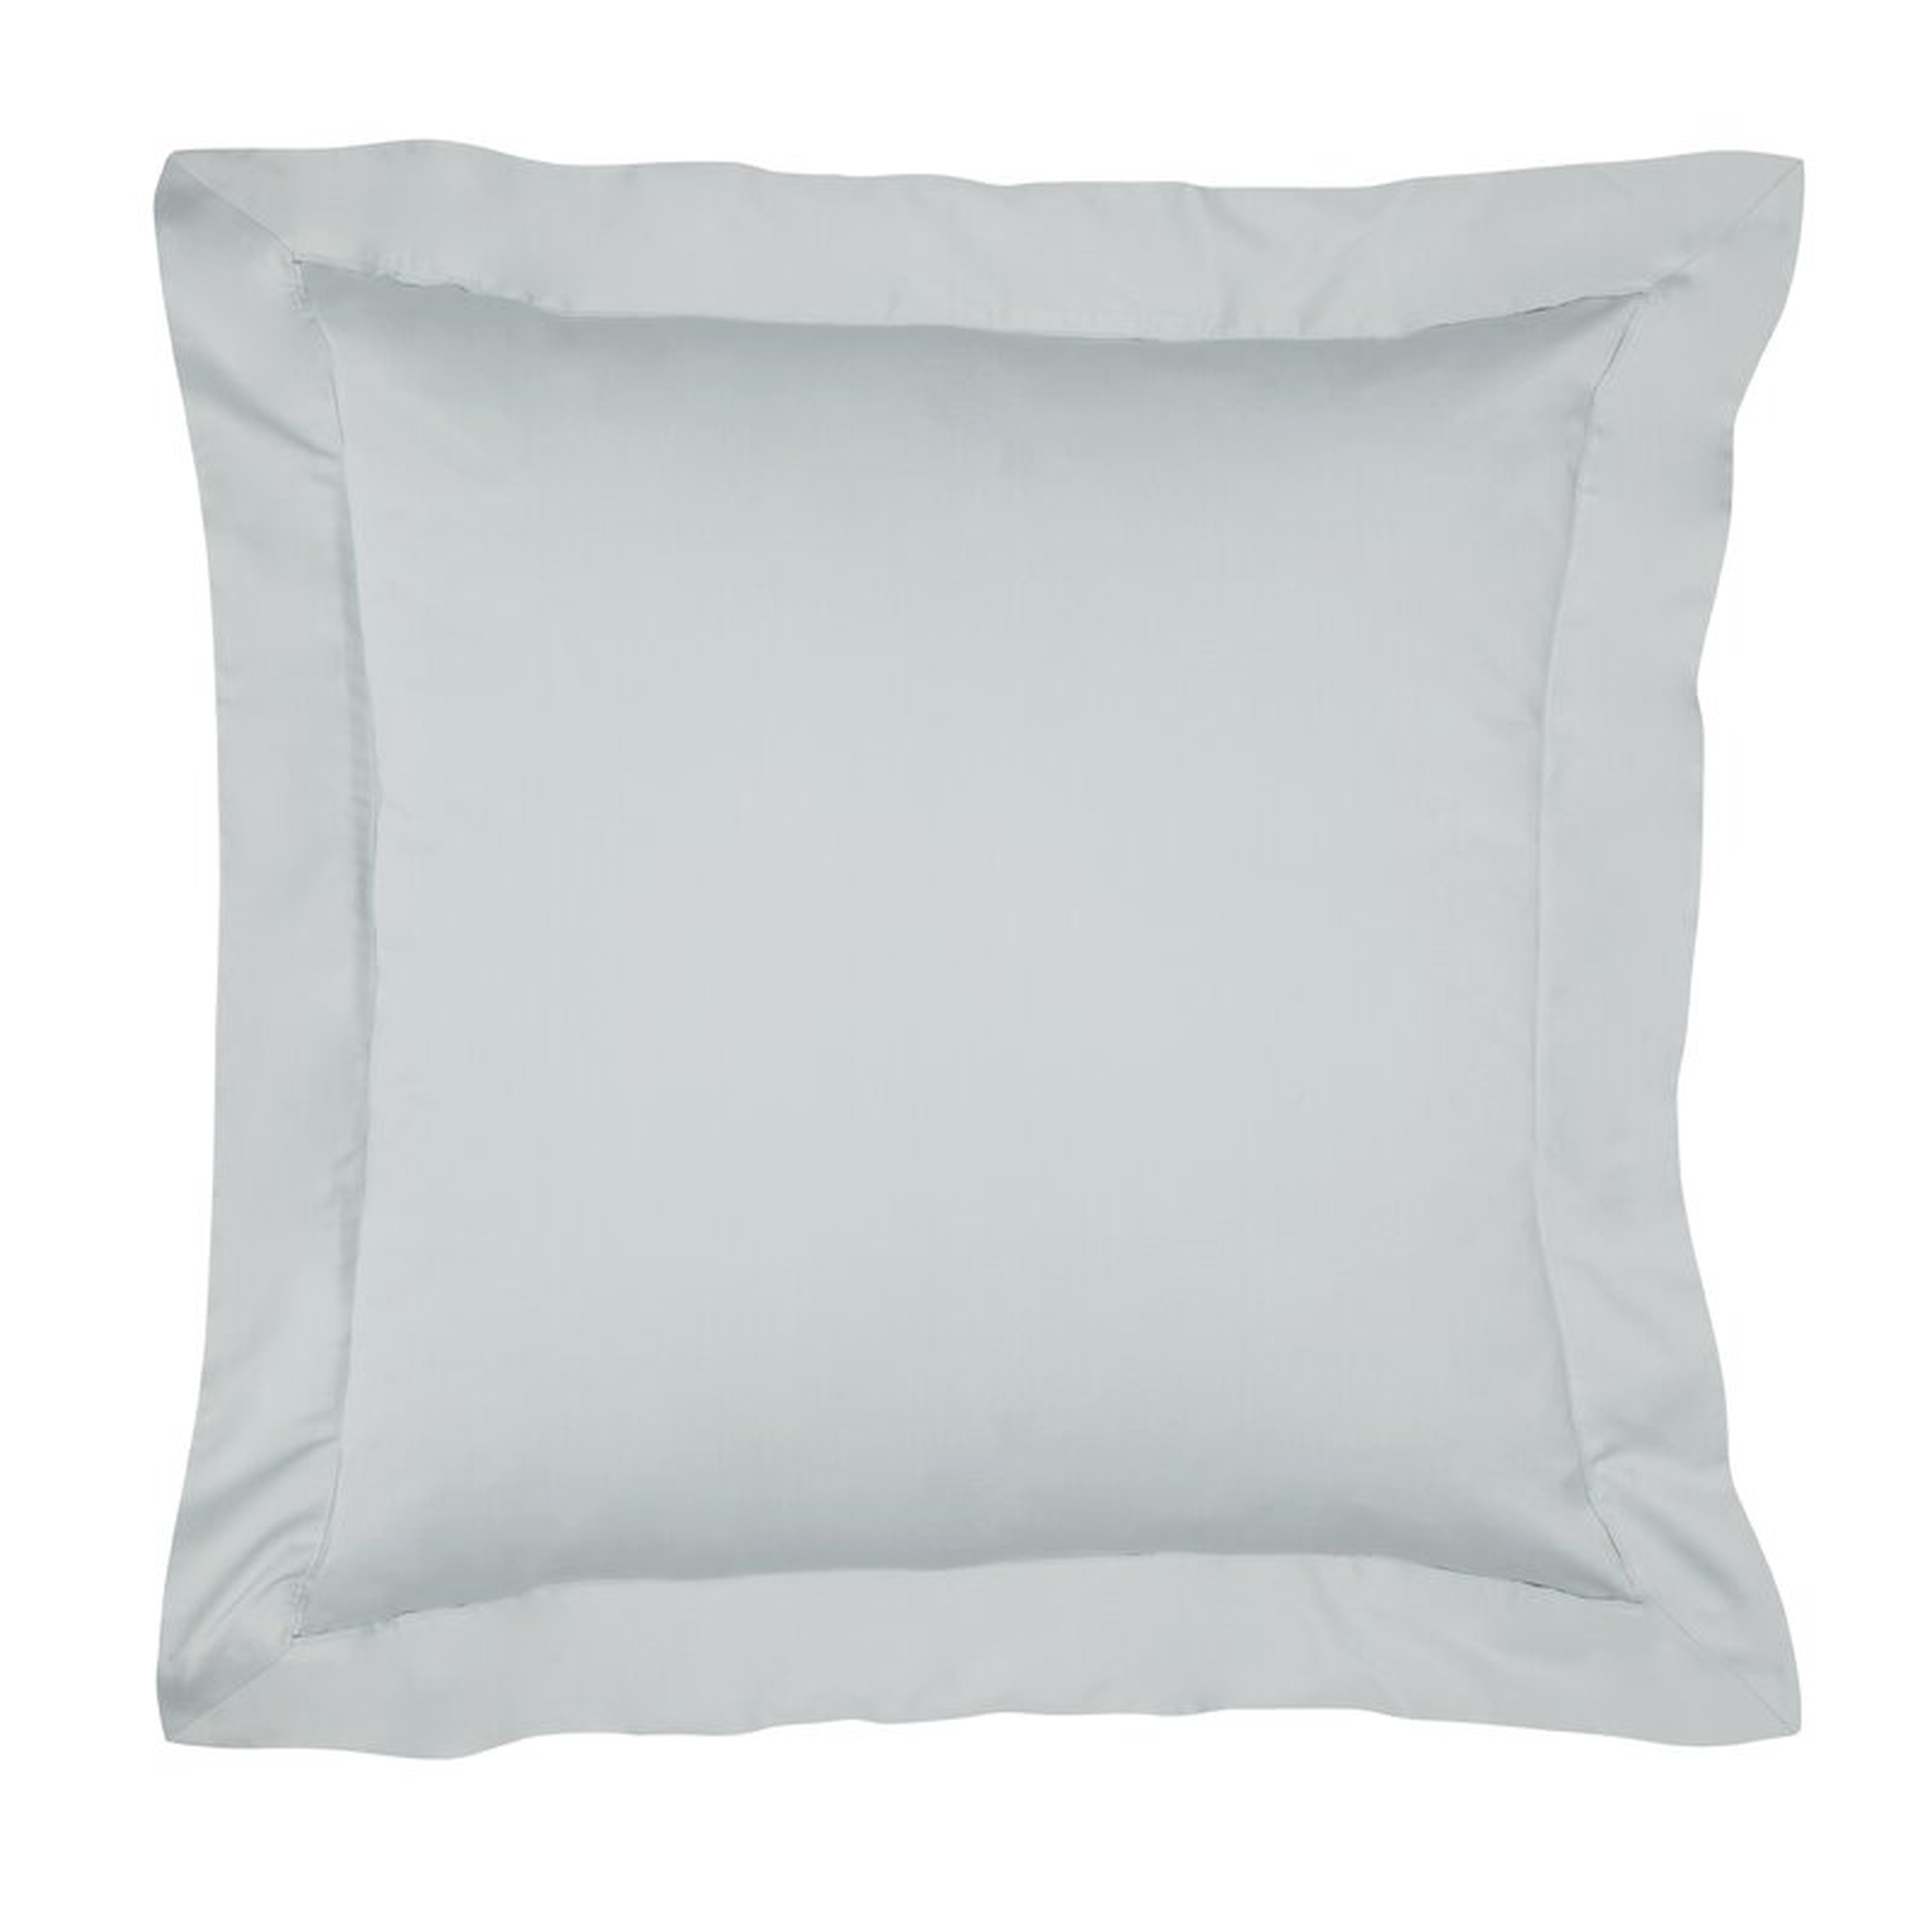  Rayon from Bamboo Sham Size: Queen, Color: Silver Sage - Perigold